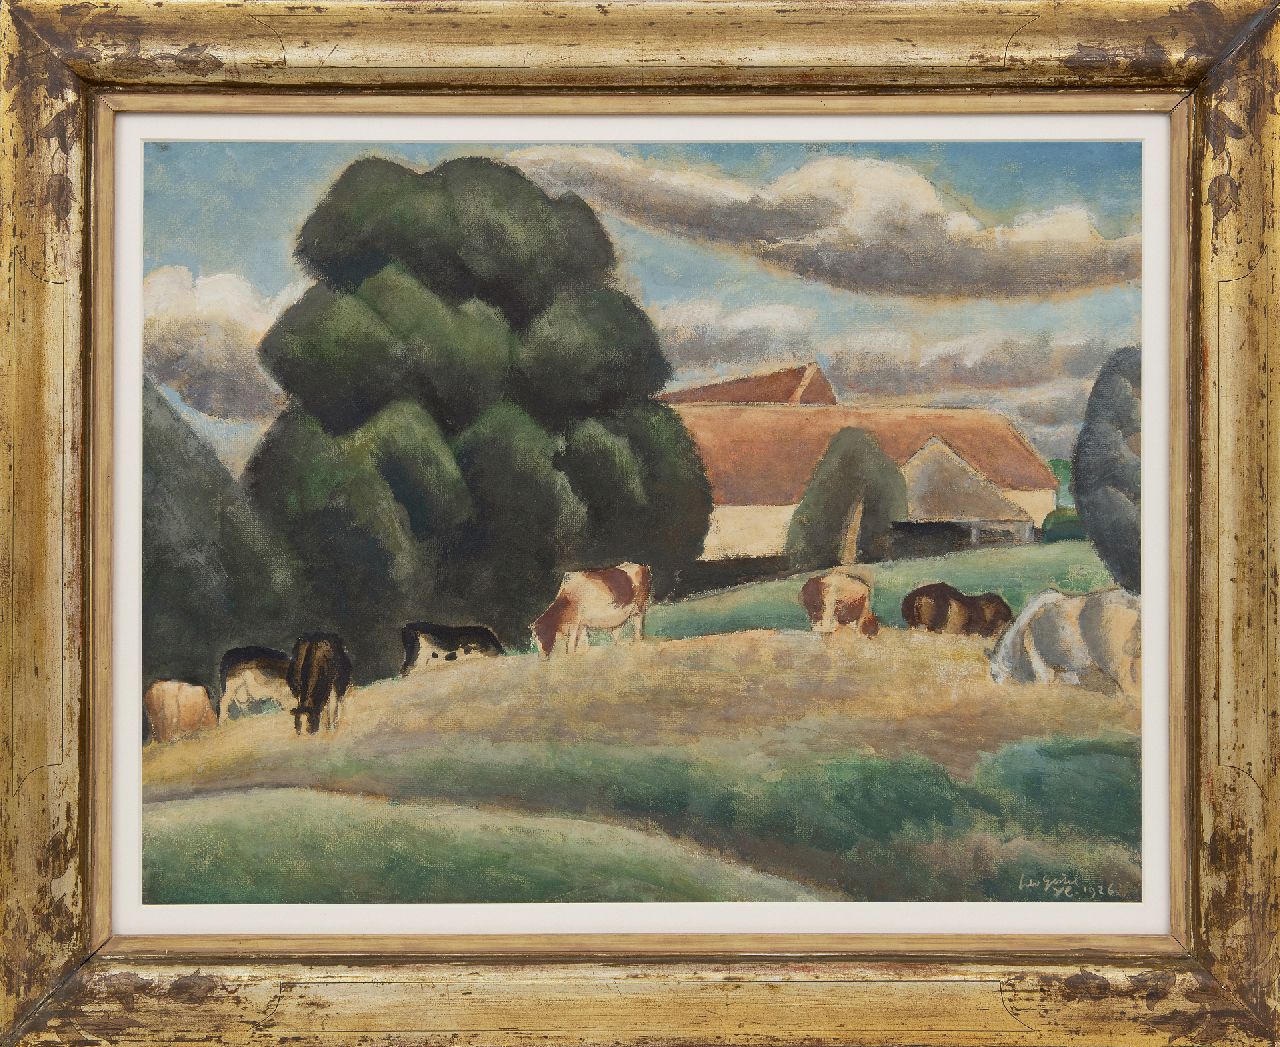 Gestel L.  | Leendert 'Leo' Gestel, Farm and cattle near Drongen along the Leie, Flanders, watercolour and gouache on paper 47.6 x 61.7 cm, signed l.r. and dated 'YC' 1926